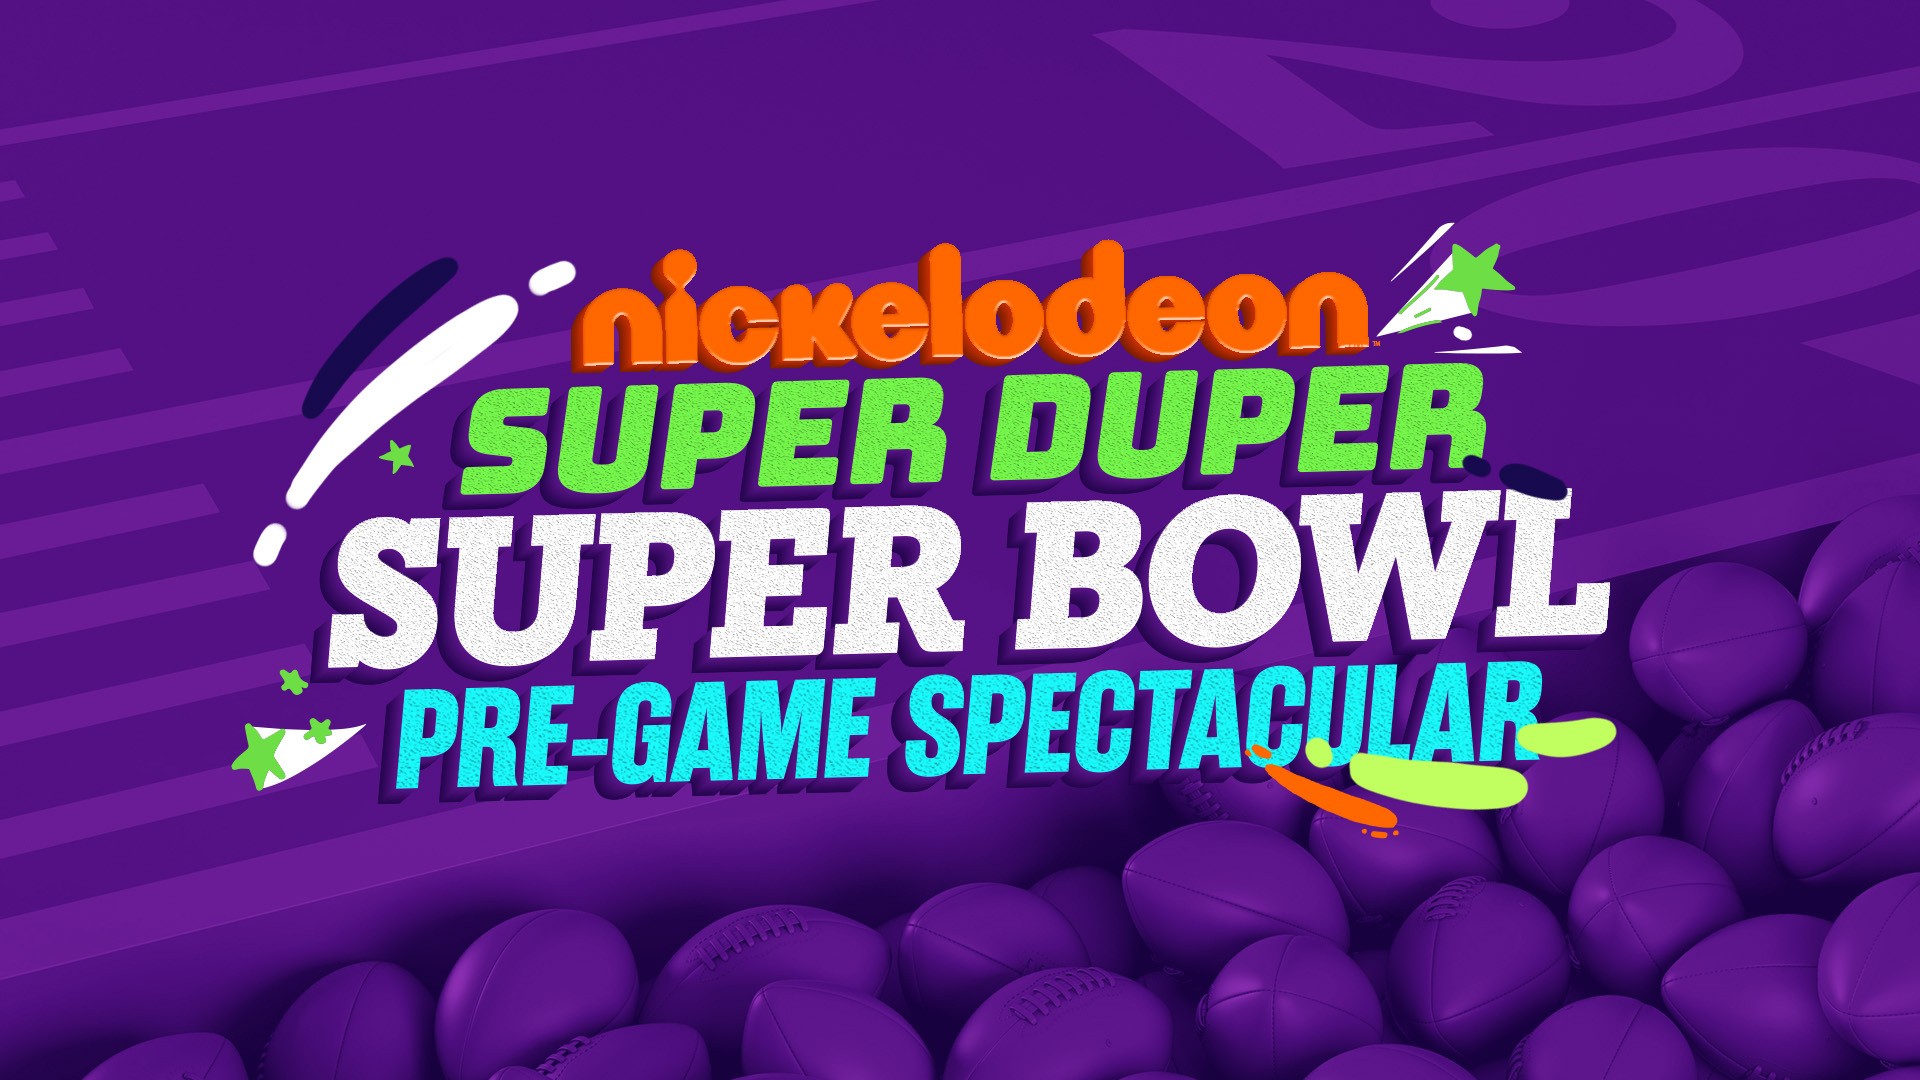 Nickelodeon x CBS Sports TeamUp for the 'Nickelodeon Super Duper Super